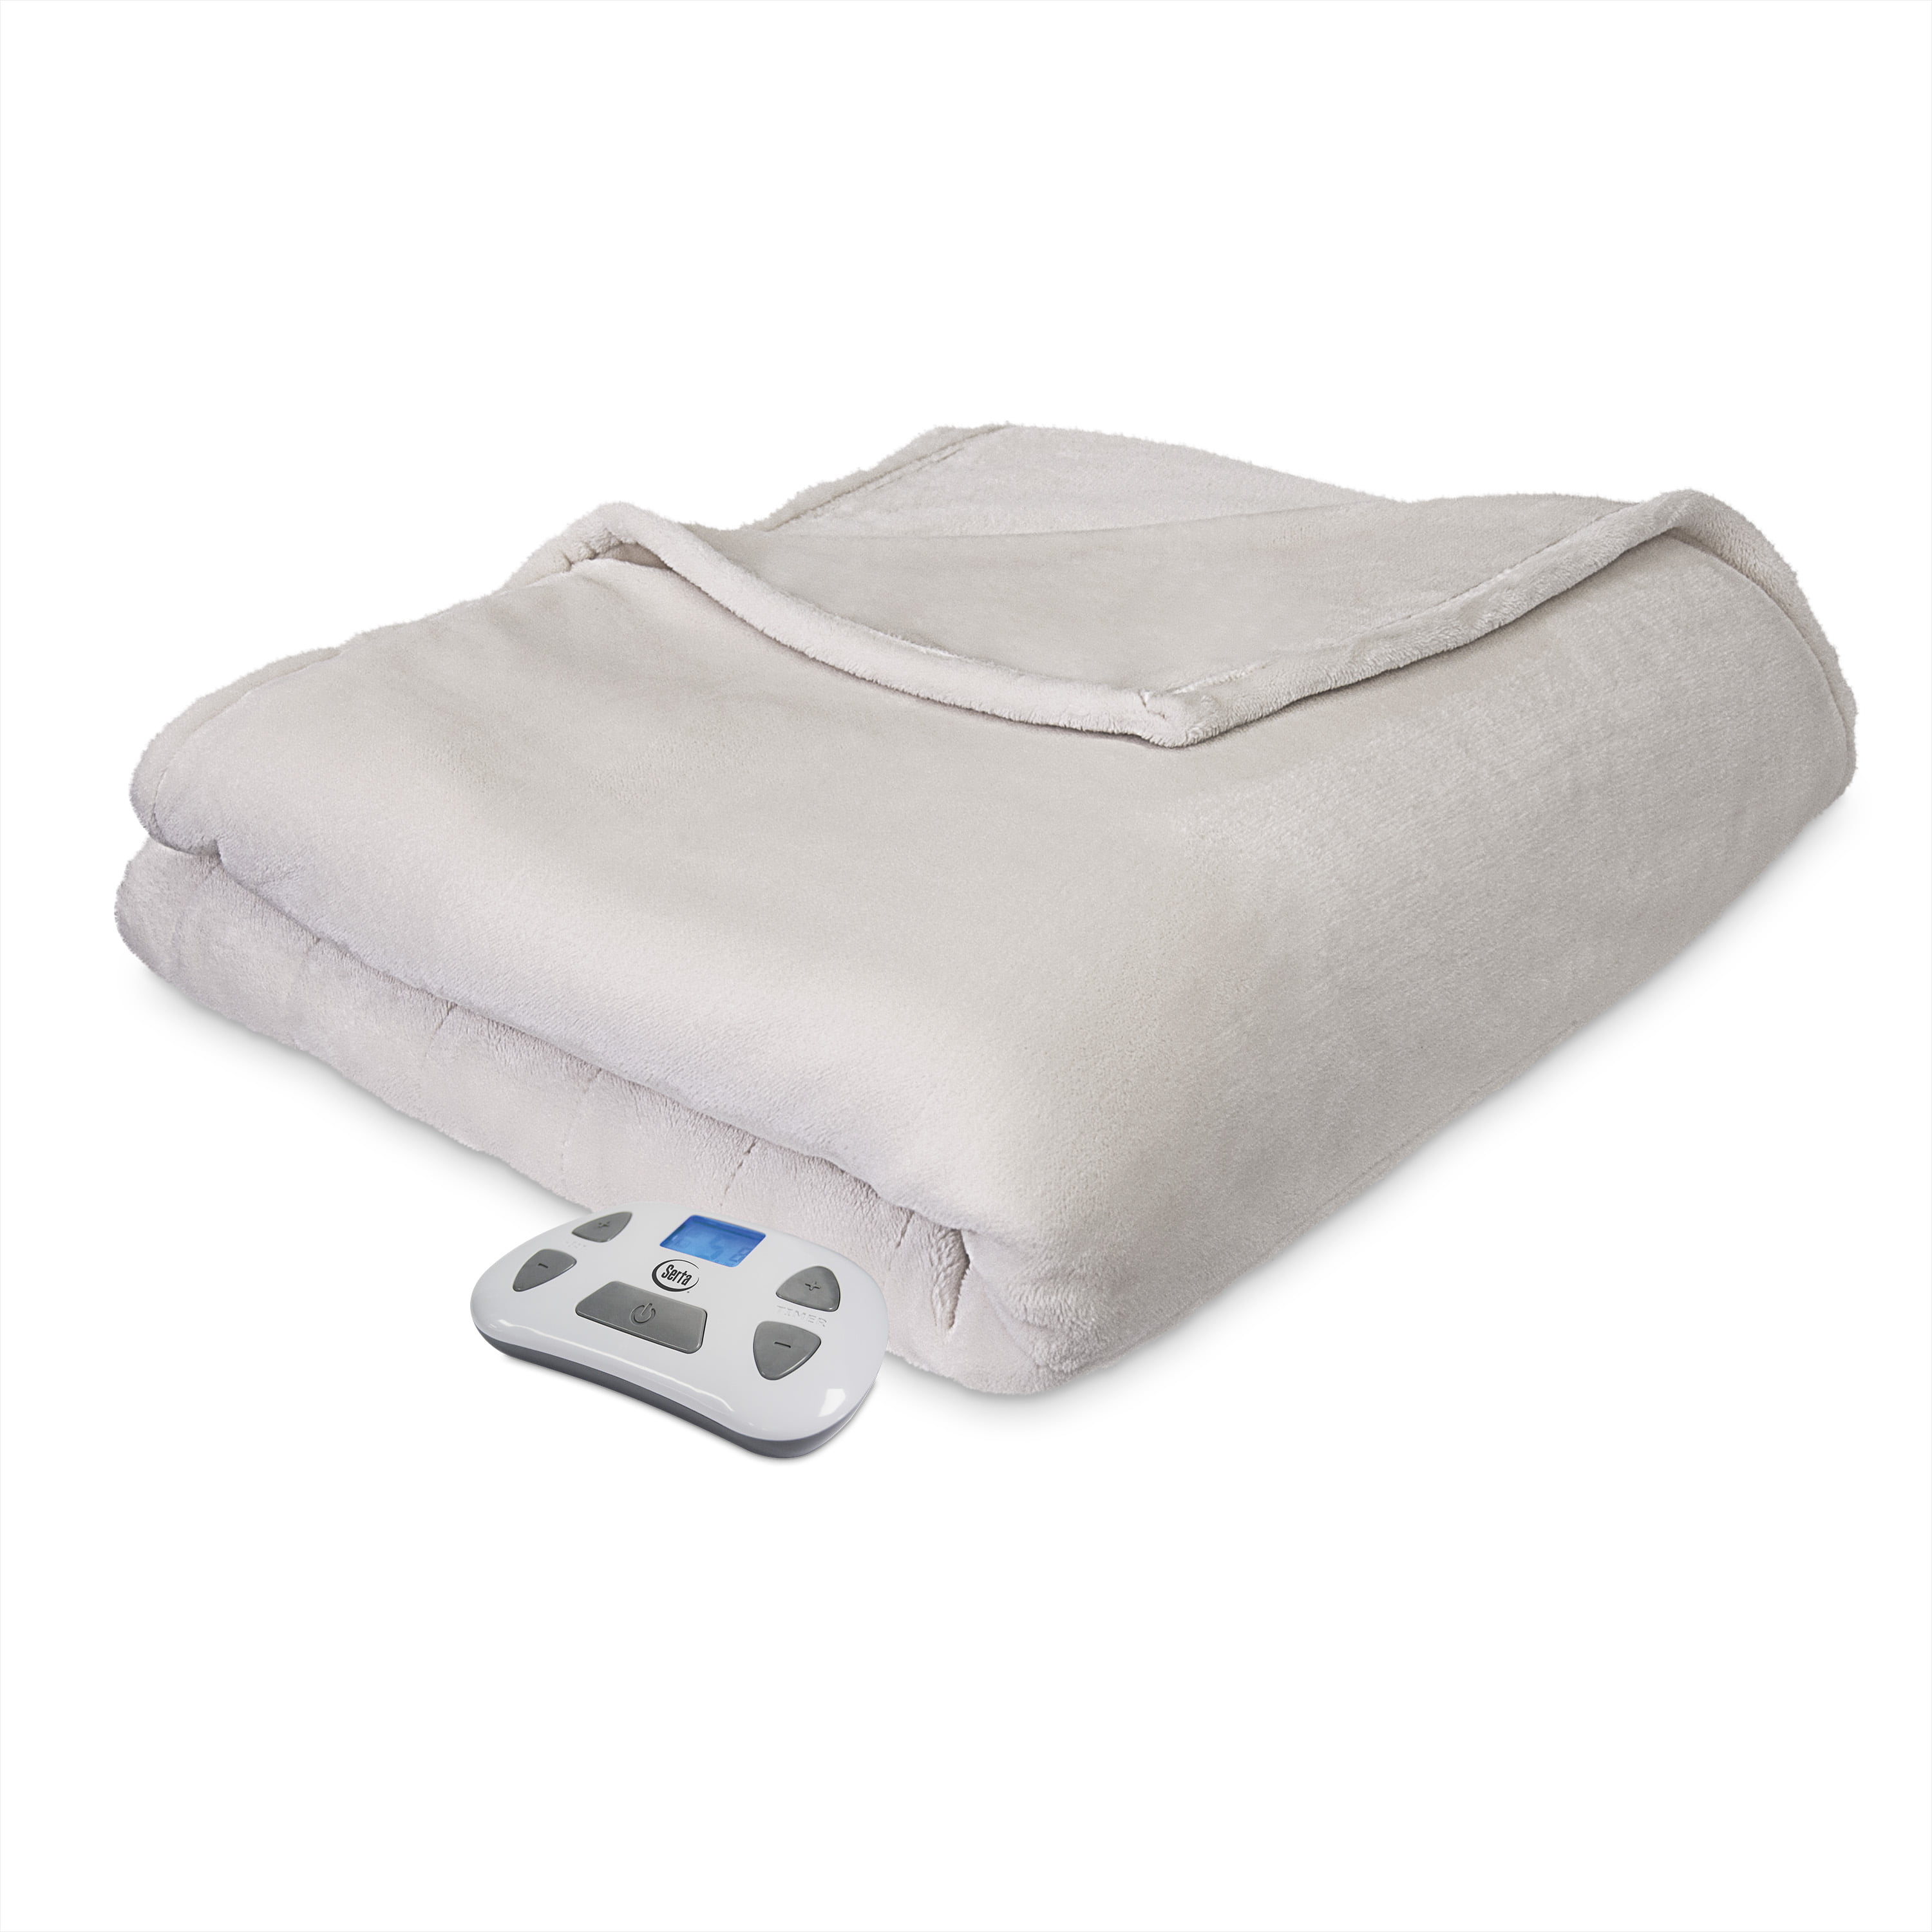 Serta Chocolate Twin Brushed Fleece Heated Electric Blanket with Programmable Digital Controller